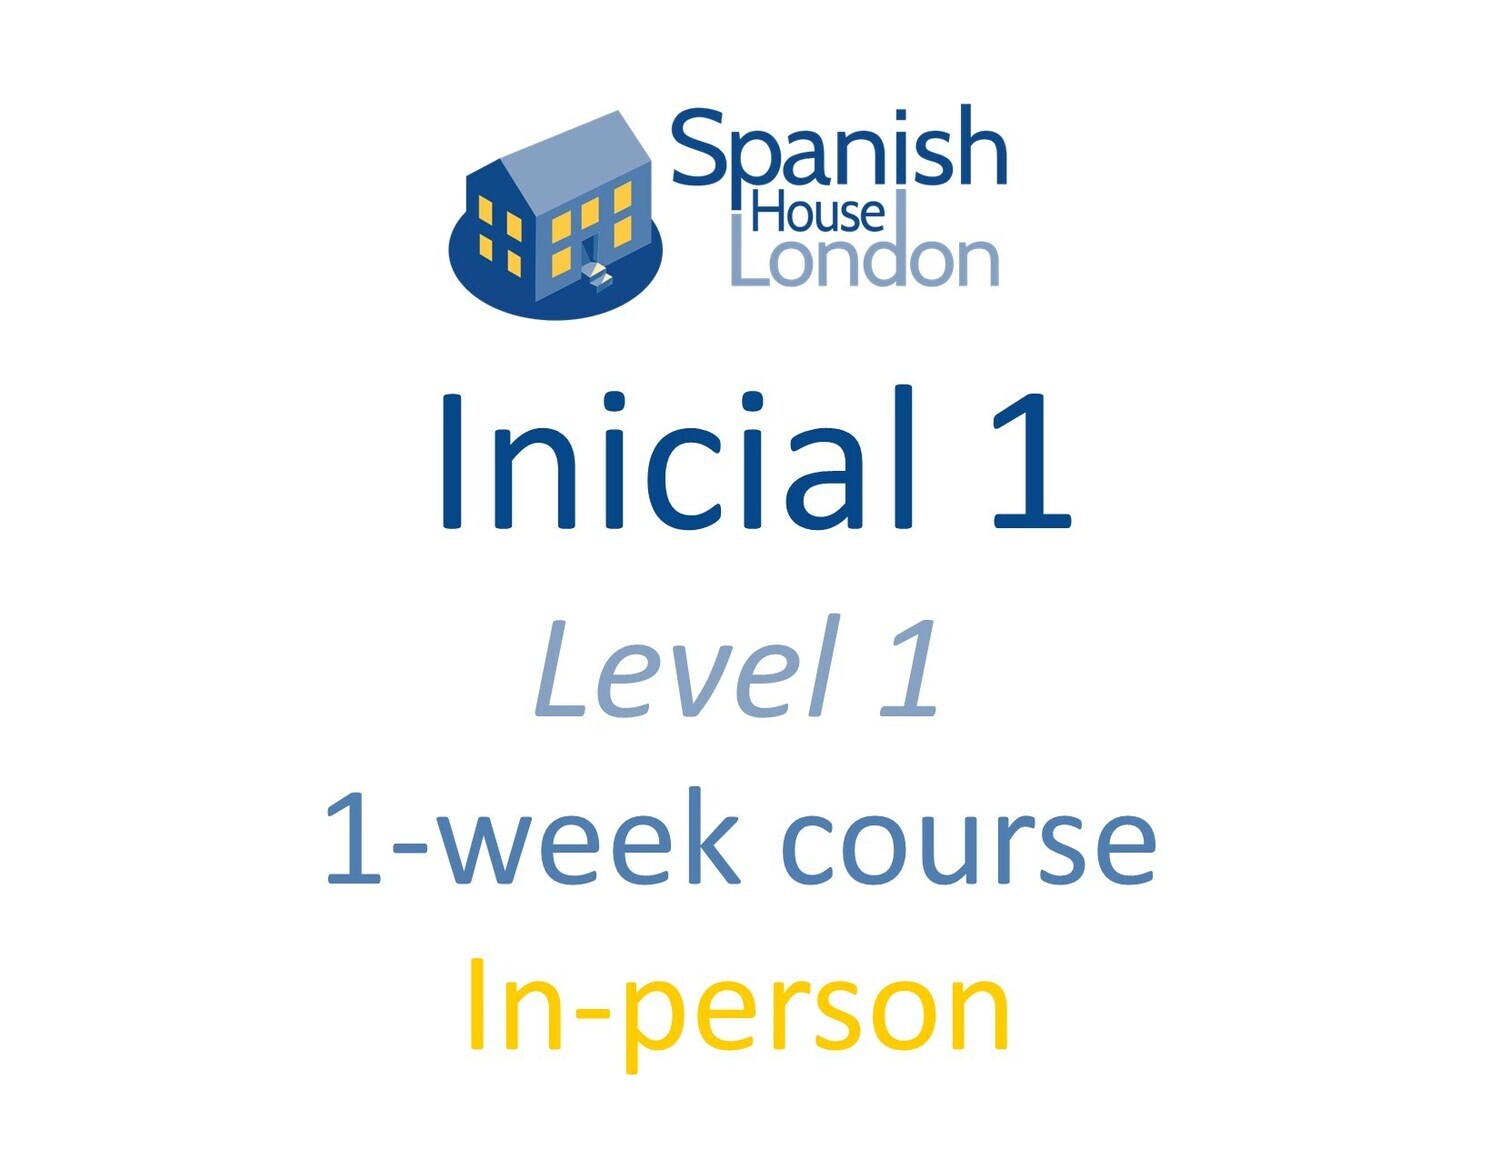 Weekend-Intensive Inicial 1 Course starting on 2nd June at 7pm in Clapham North